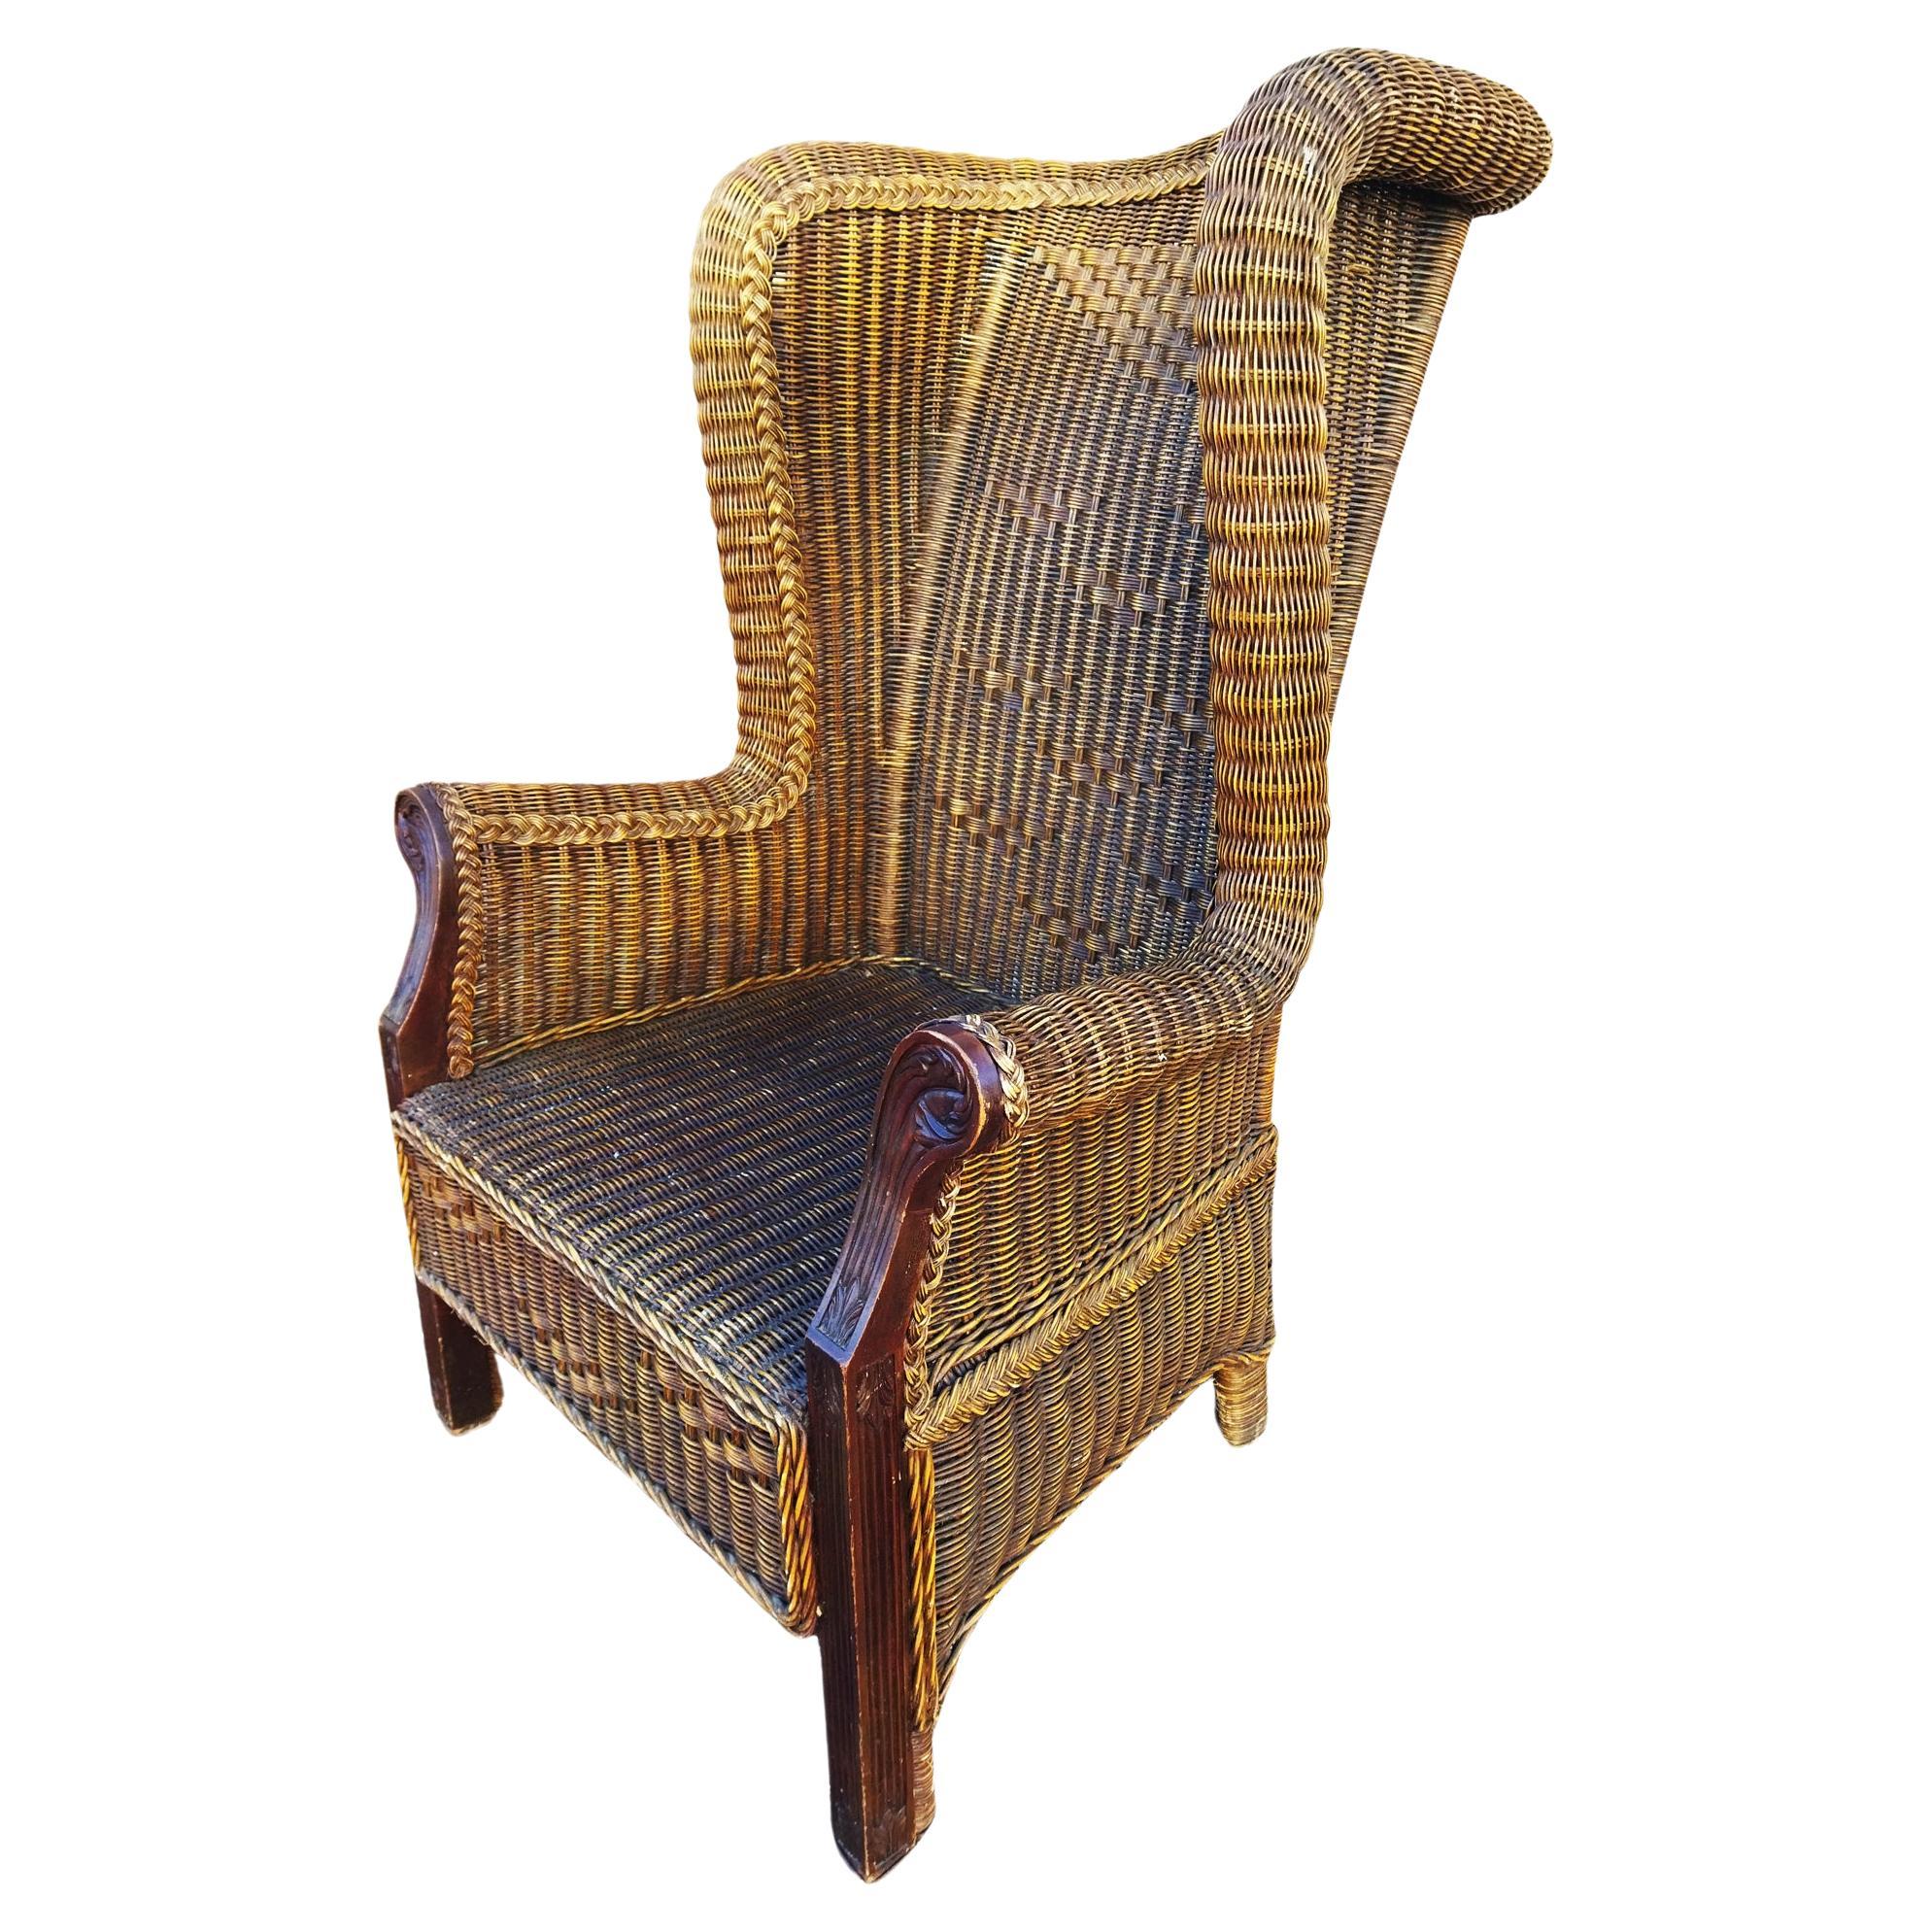  Spectacular VictorianStyle  Wicker Throne, Very Big  High Backrest  Wide Seat For Sale